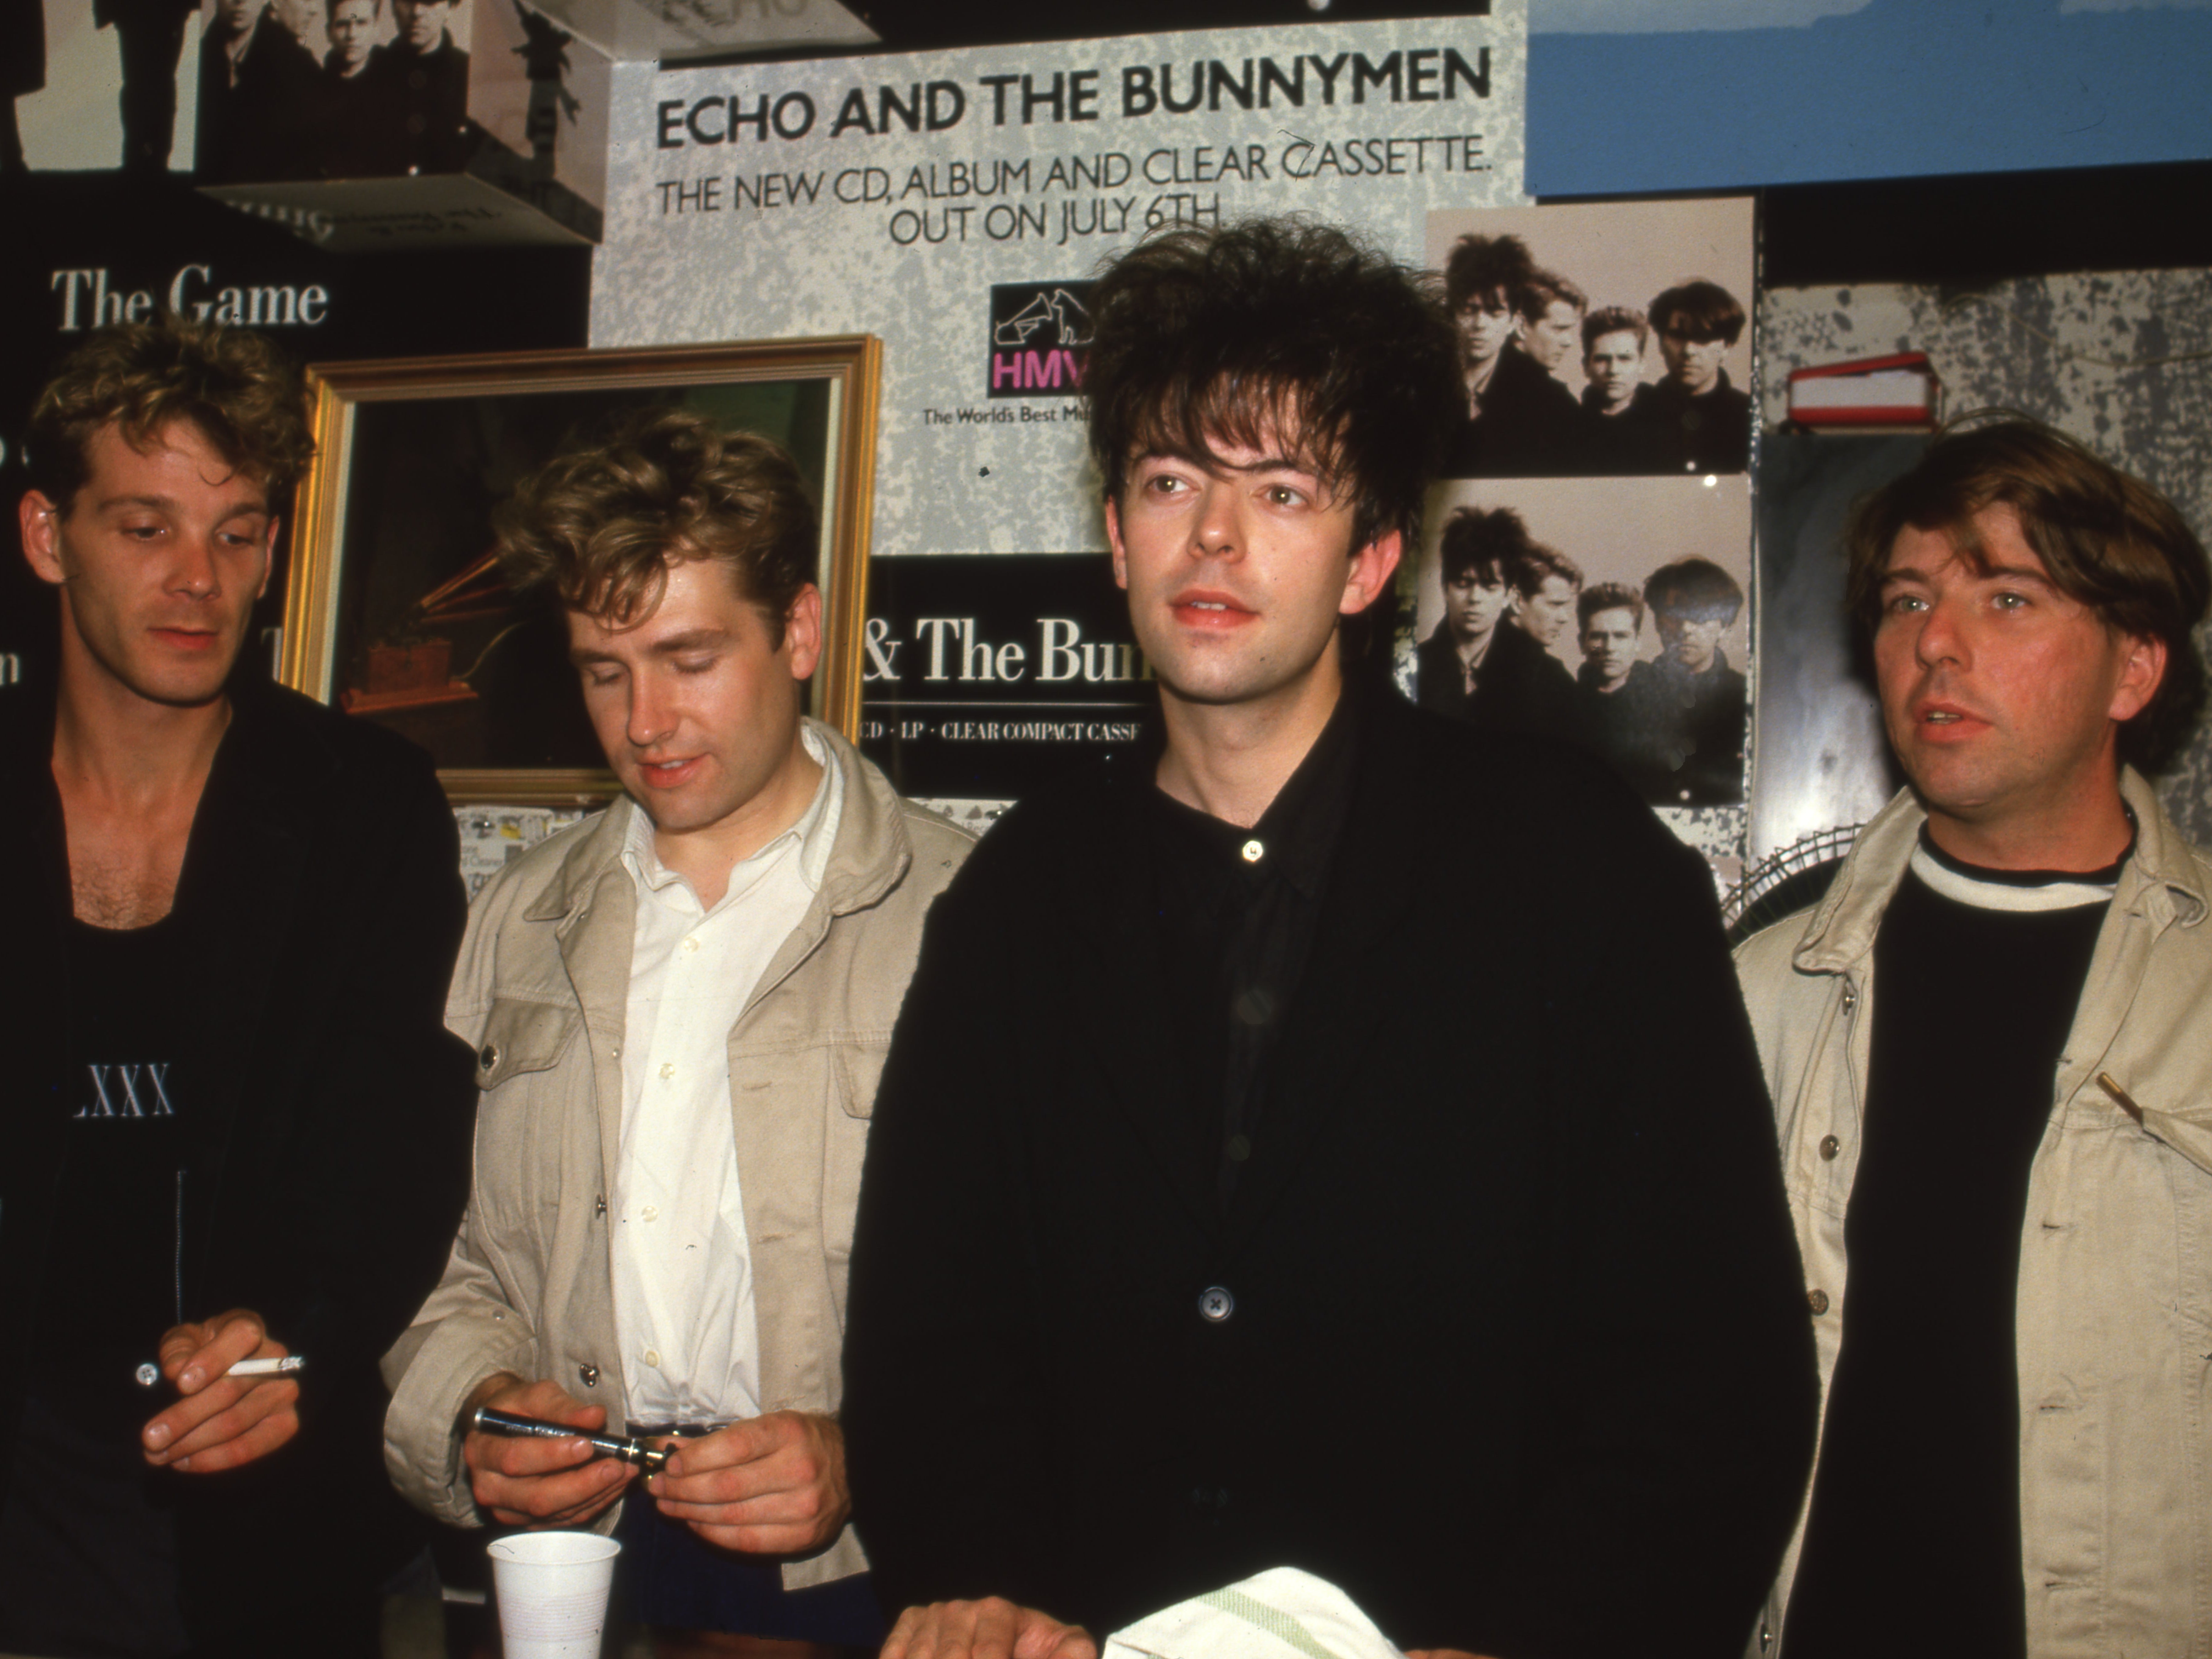 The Bunnymen in 1987